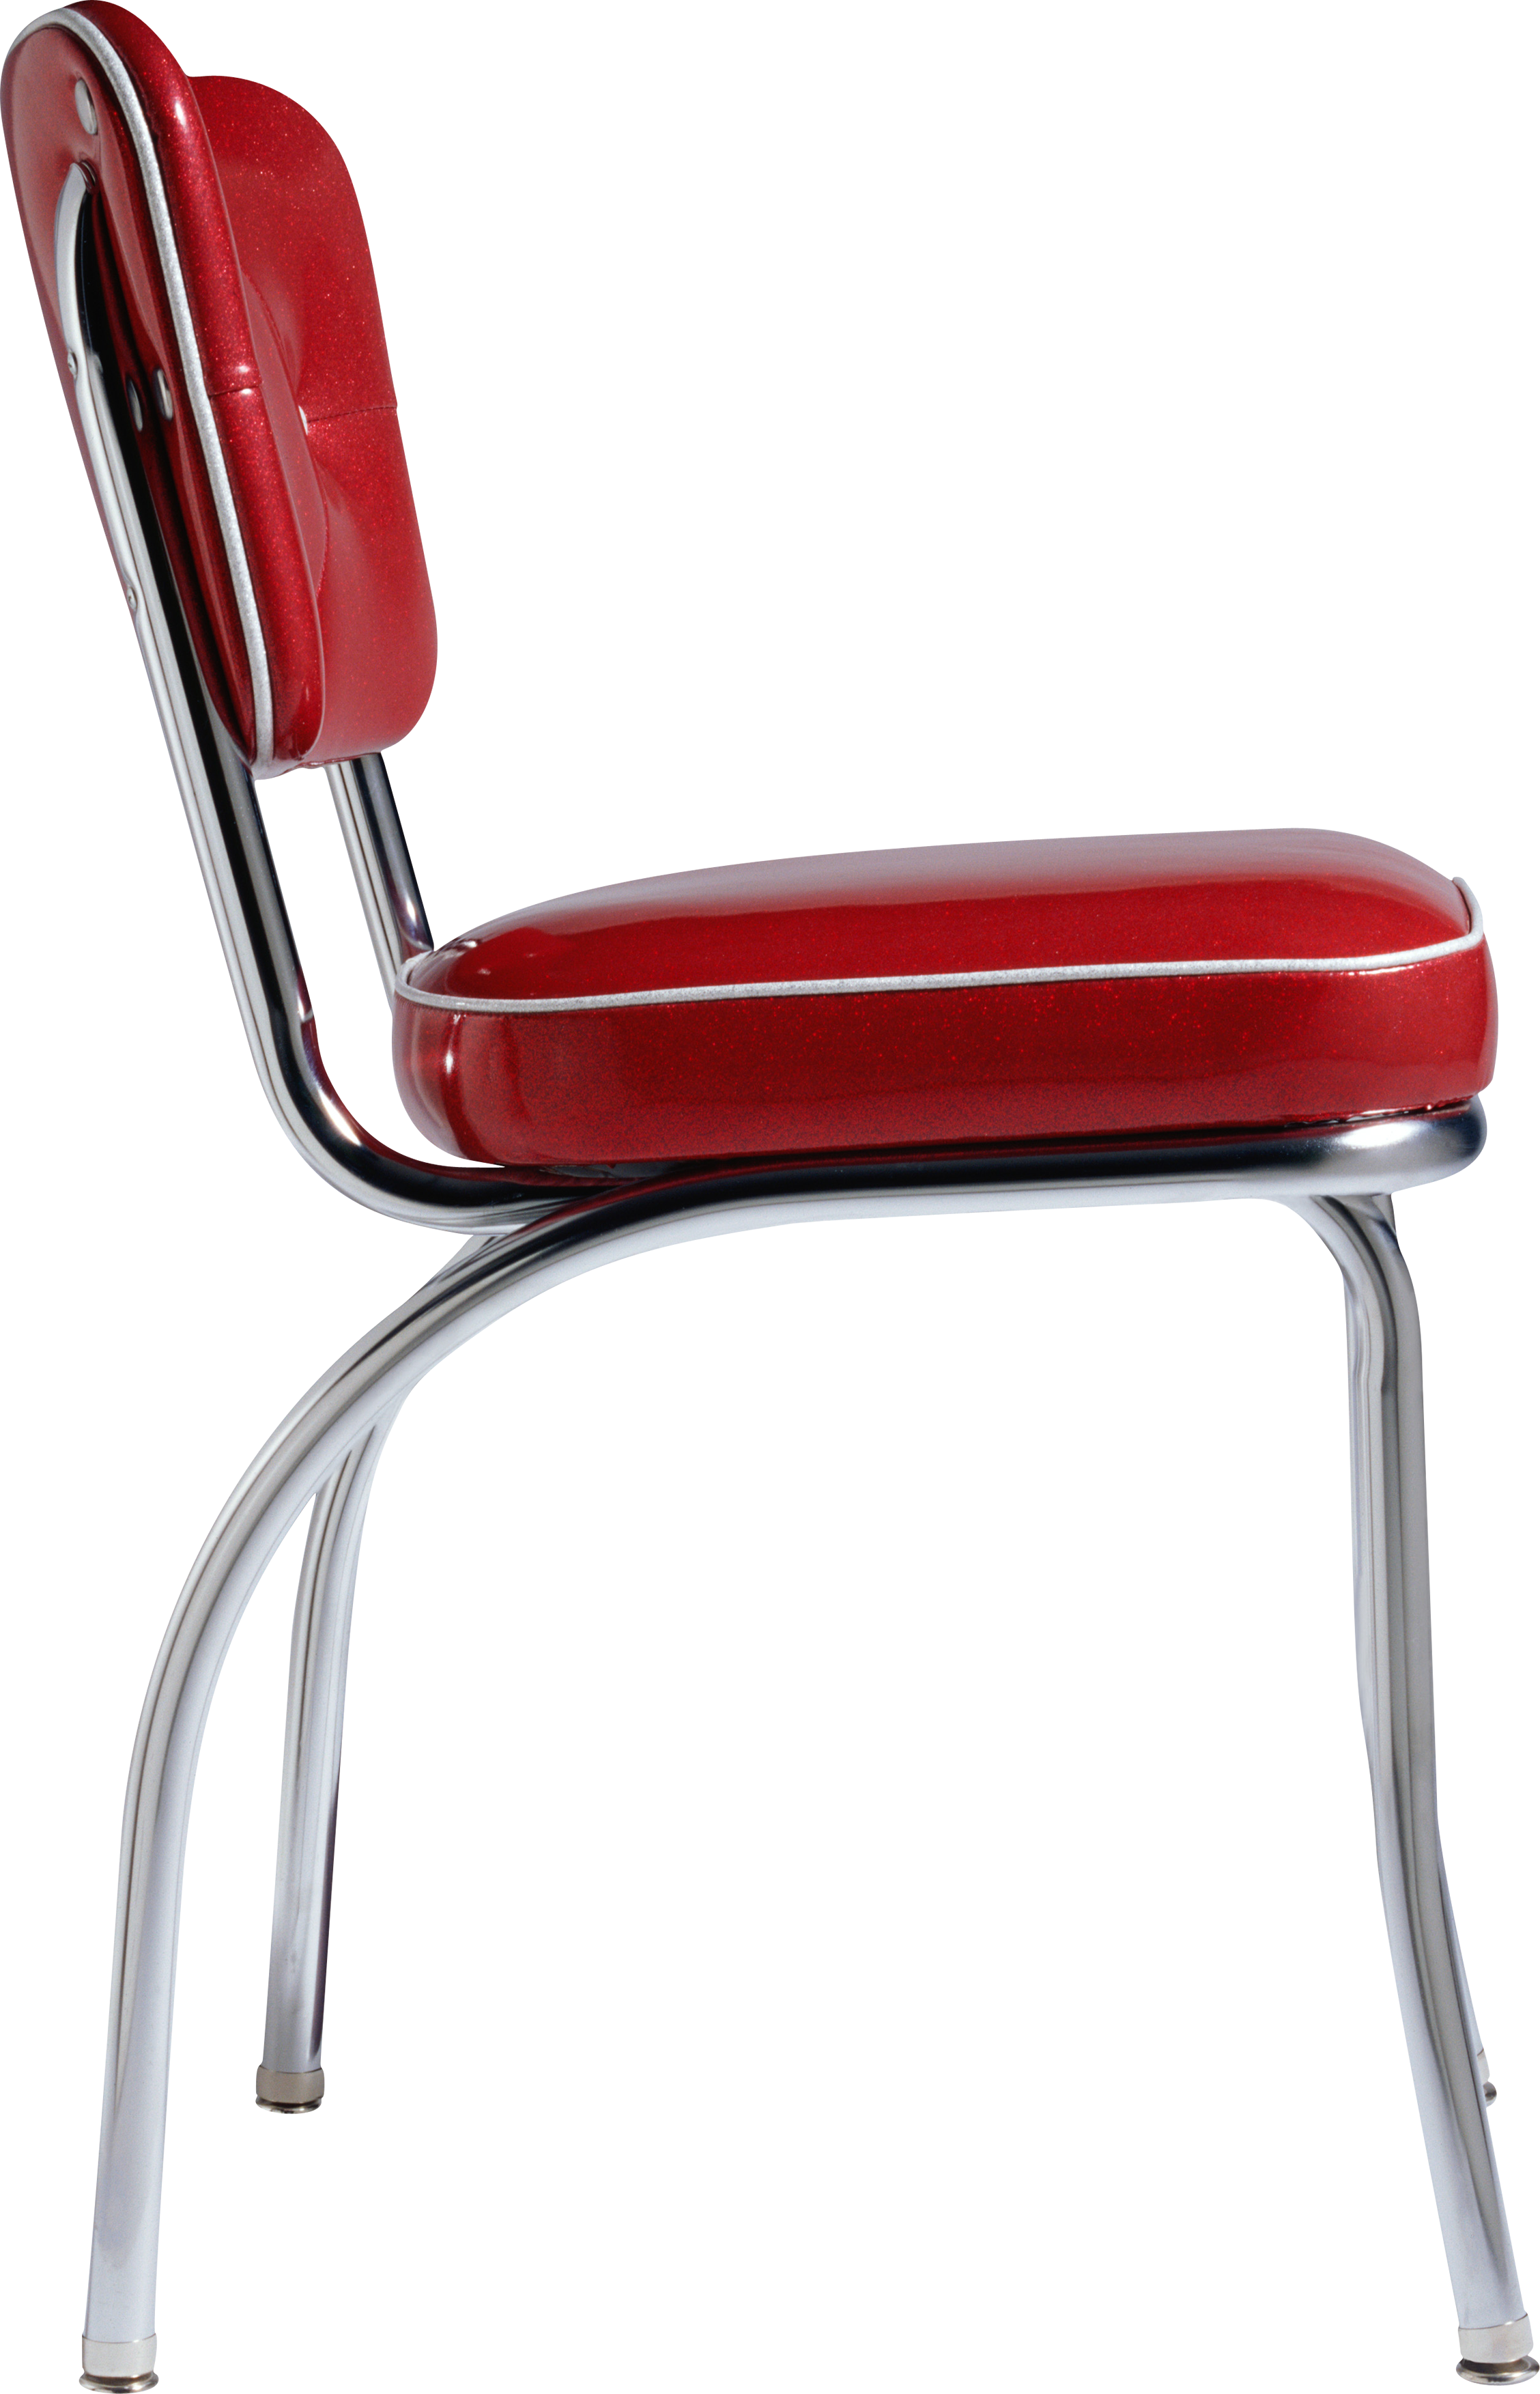 Chair PNG image transparent image download, size: 2256x3506px